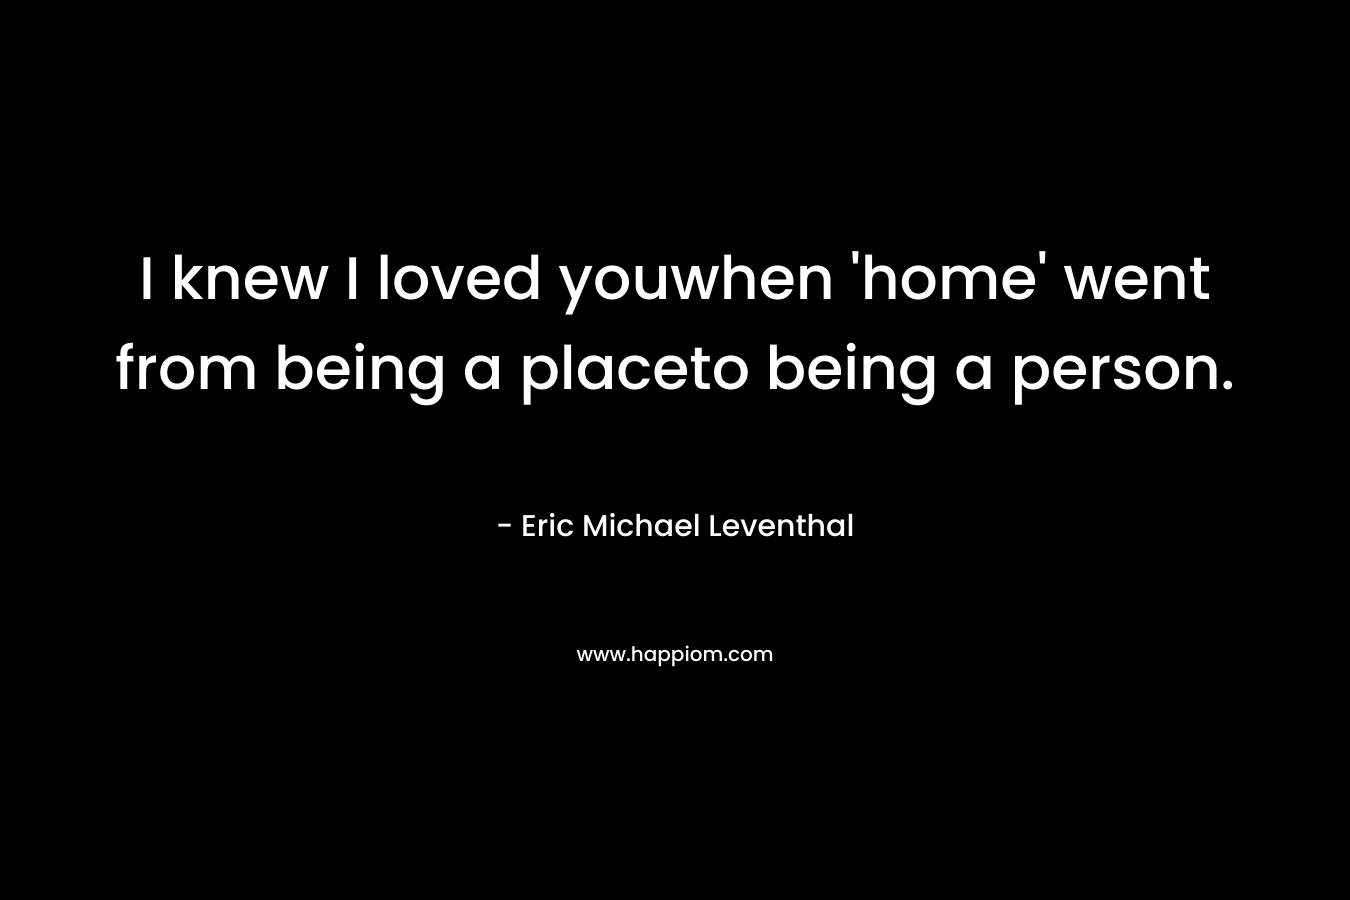 I knew I loved youwhen 'home' went from being a placeto being a person.